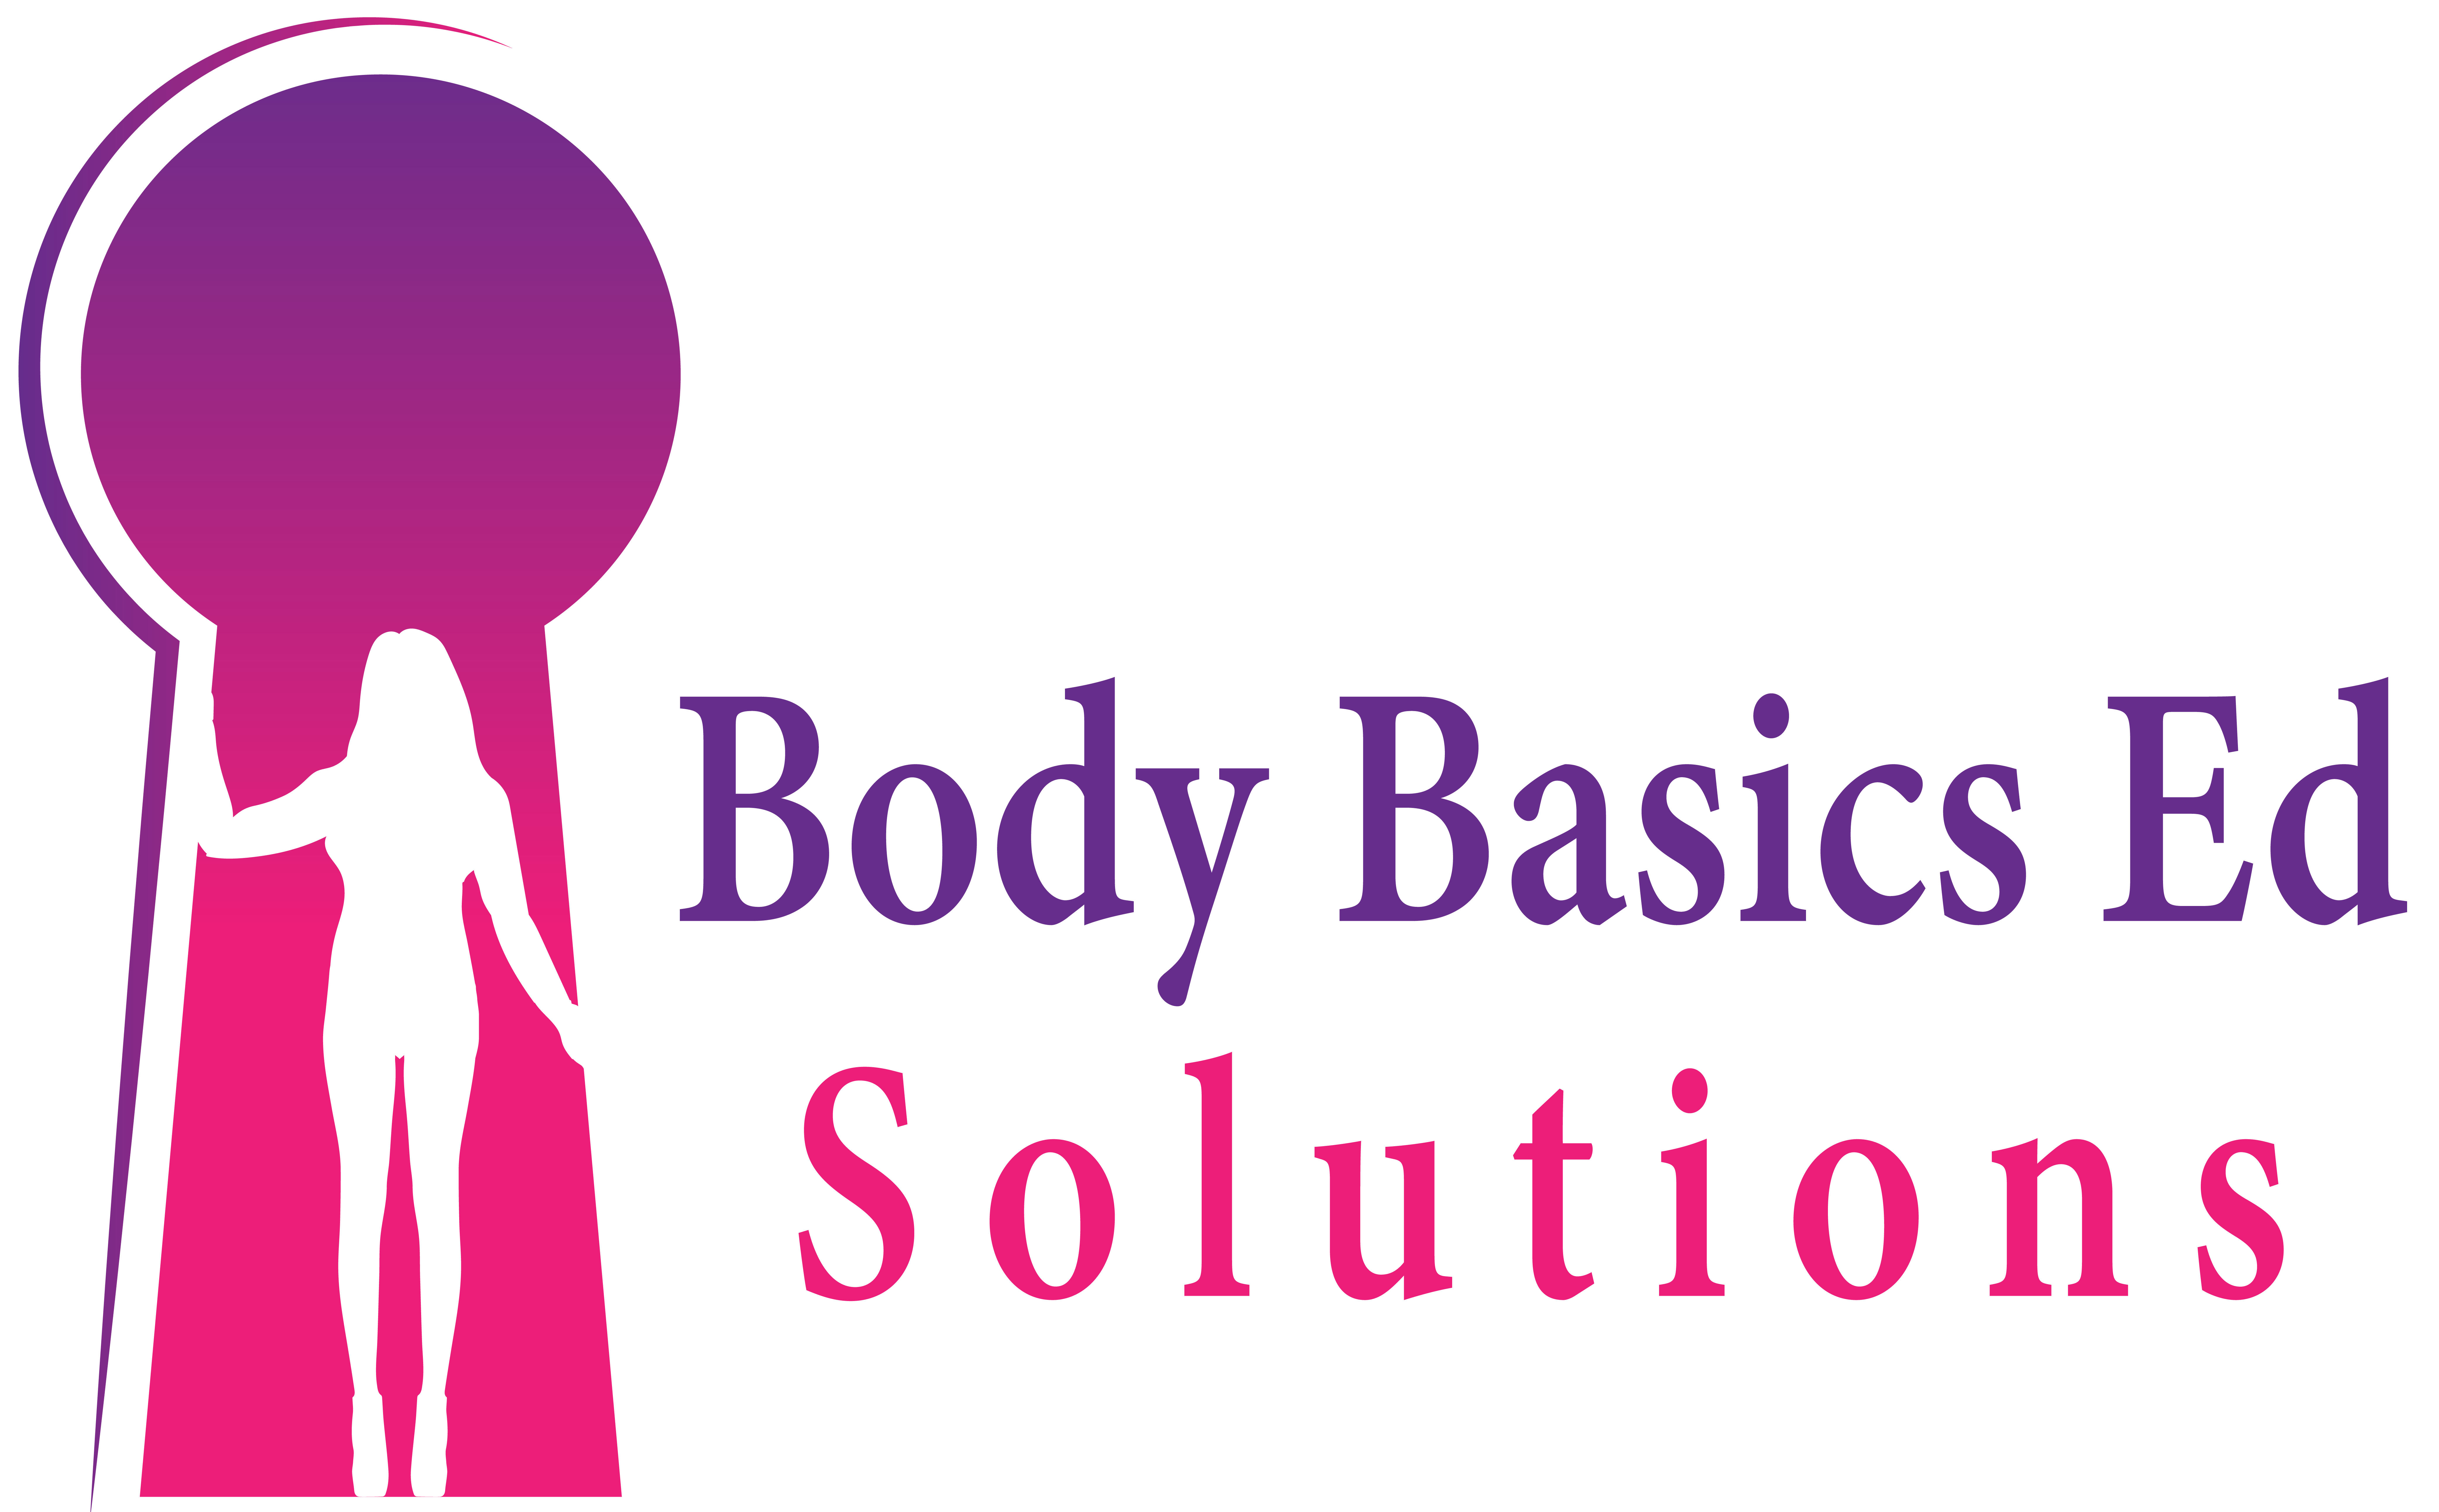 Body Solutions is back in business